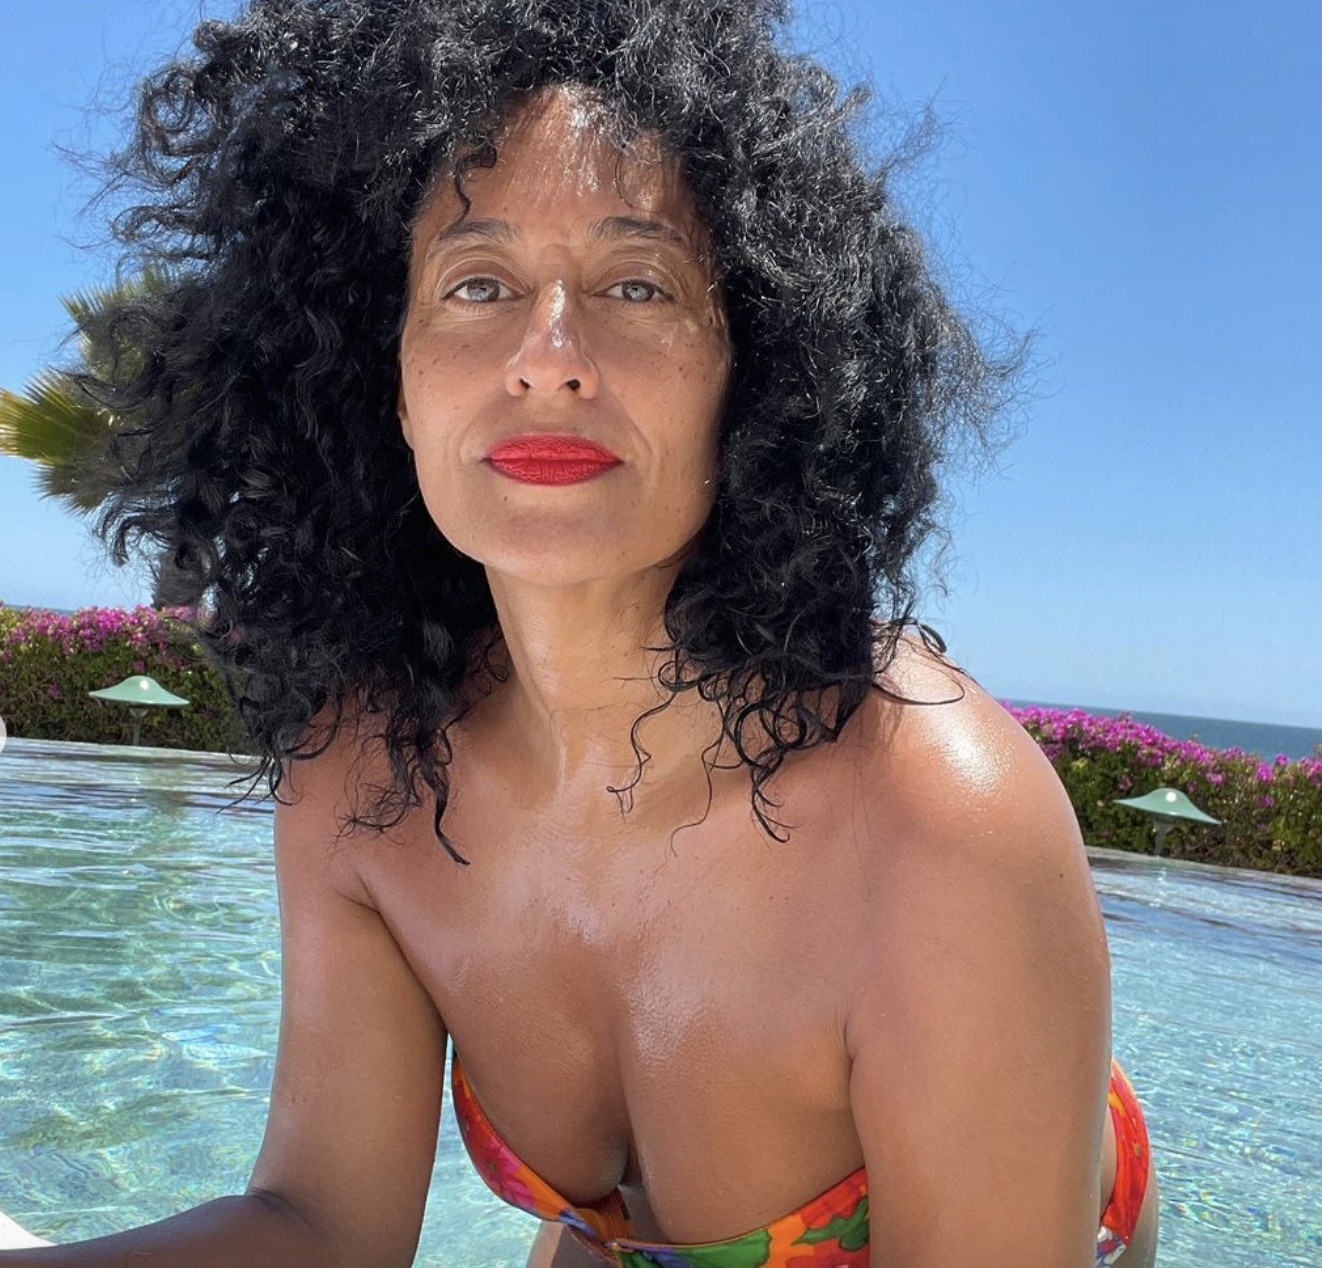 Tracee Ellis Ross Swears by Yon-Kas Phyto-Contour Eye Cream Adult Pic Hq